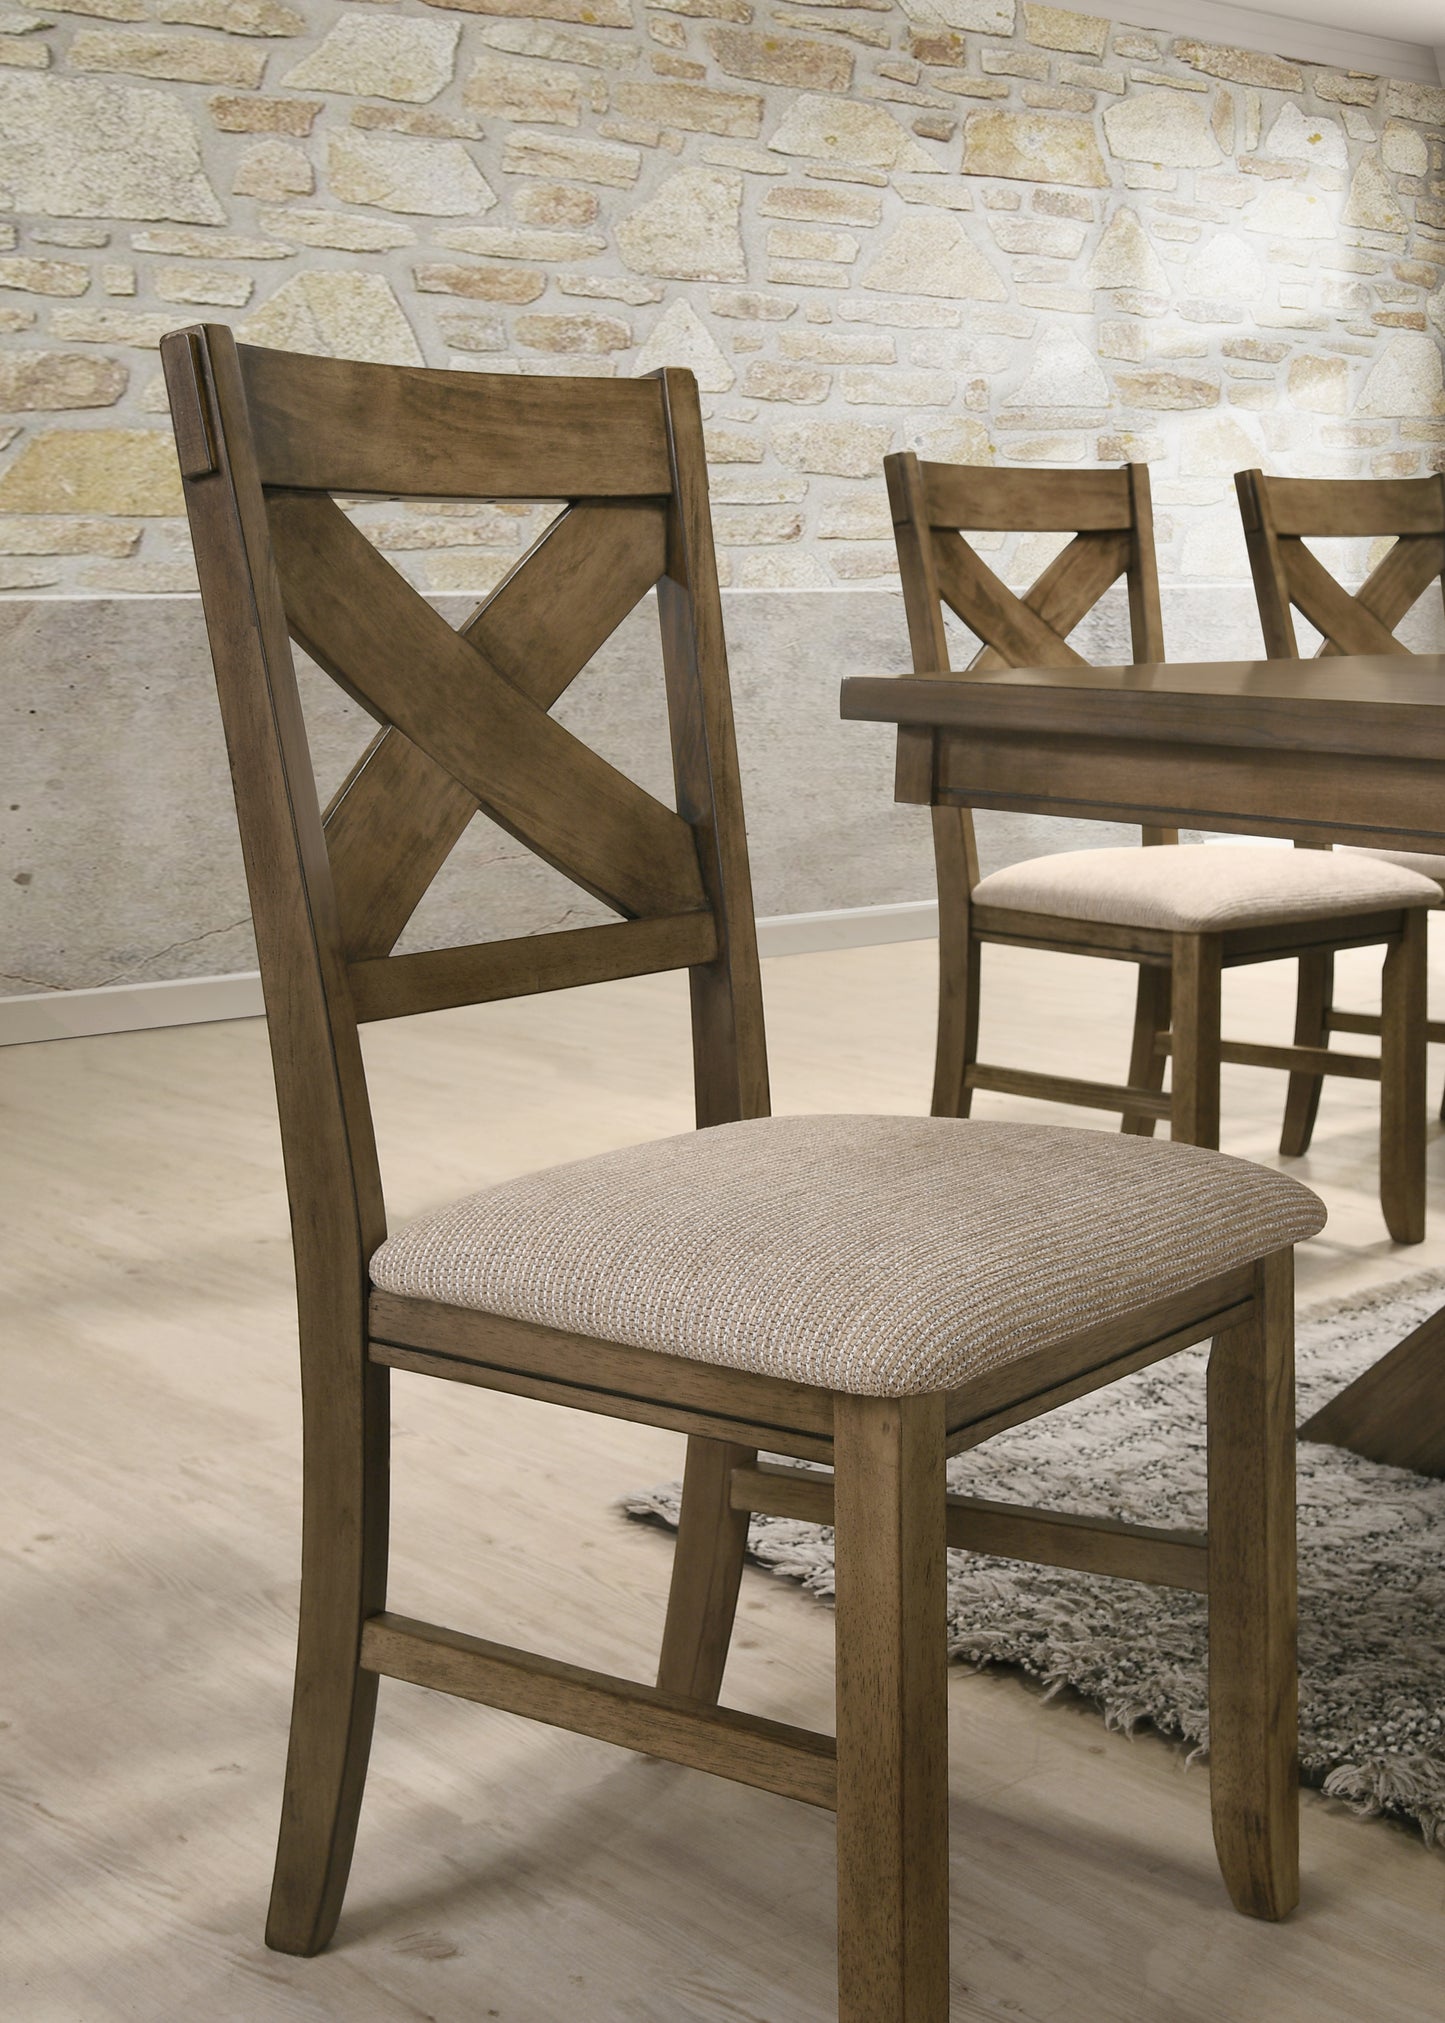 Raven Wood Fabric Upholstered Dining Chair Set of 2